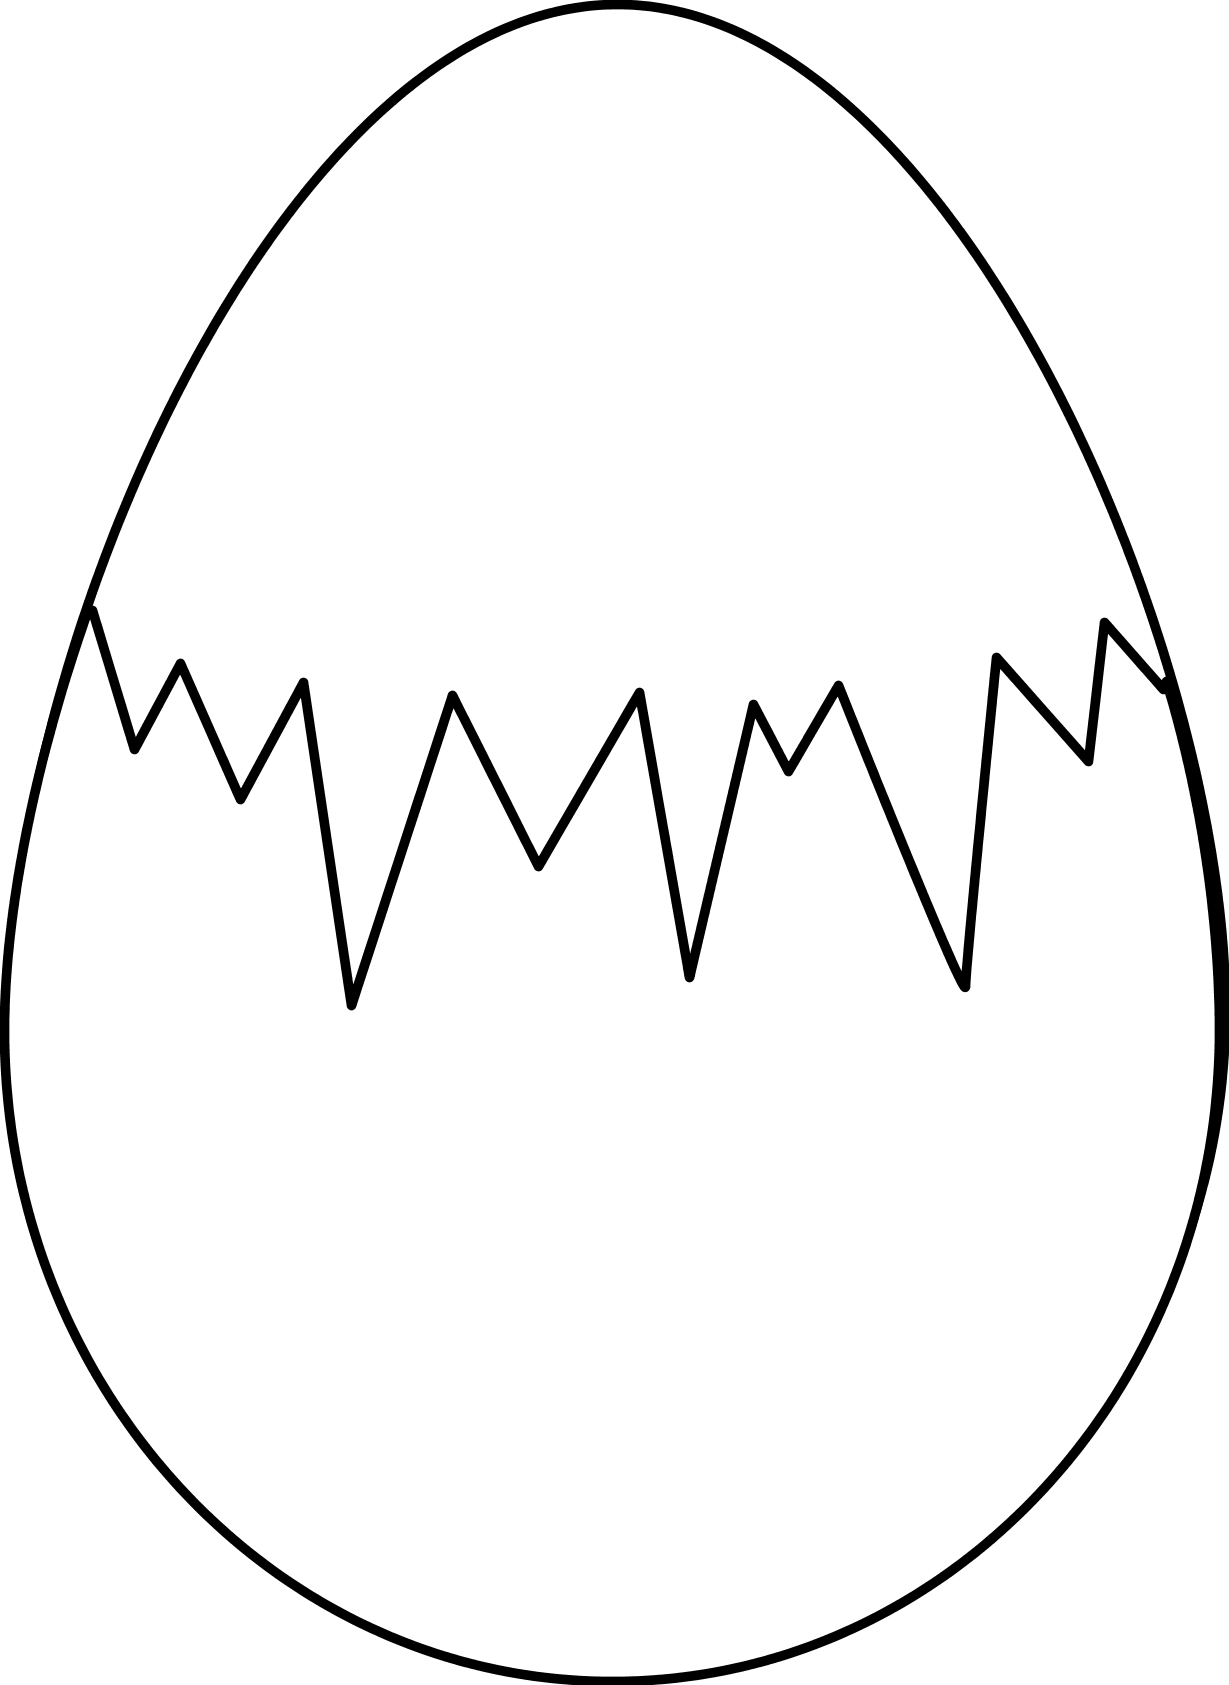 Egg black and white. Worm clipart computer worm